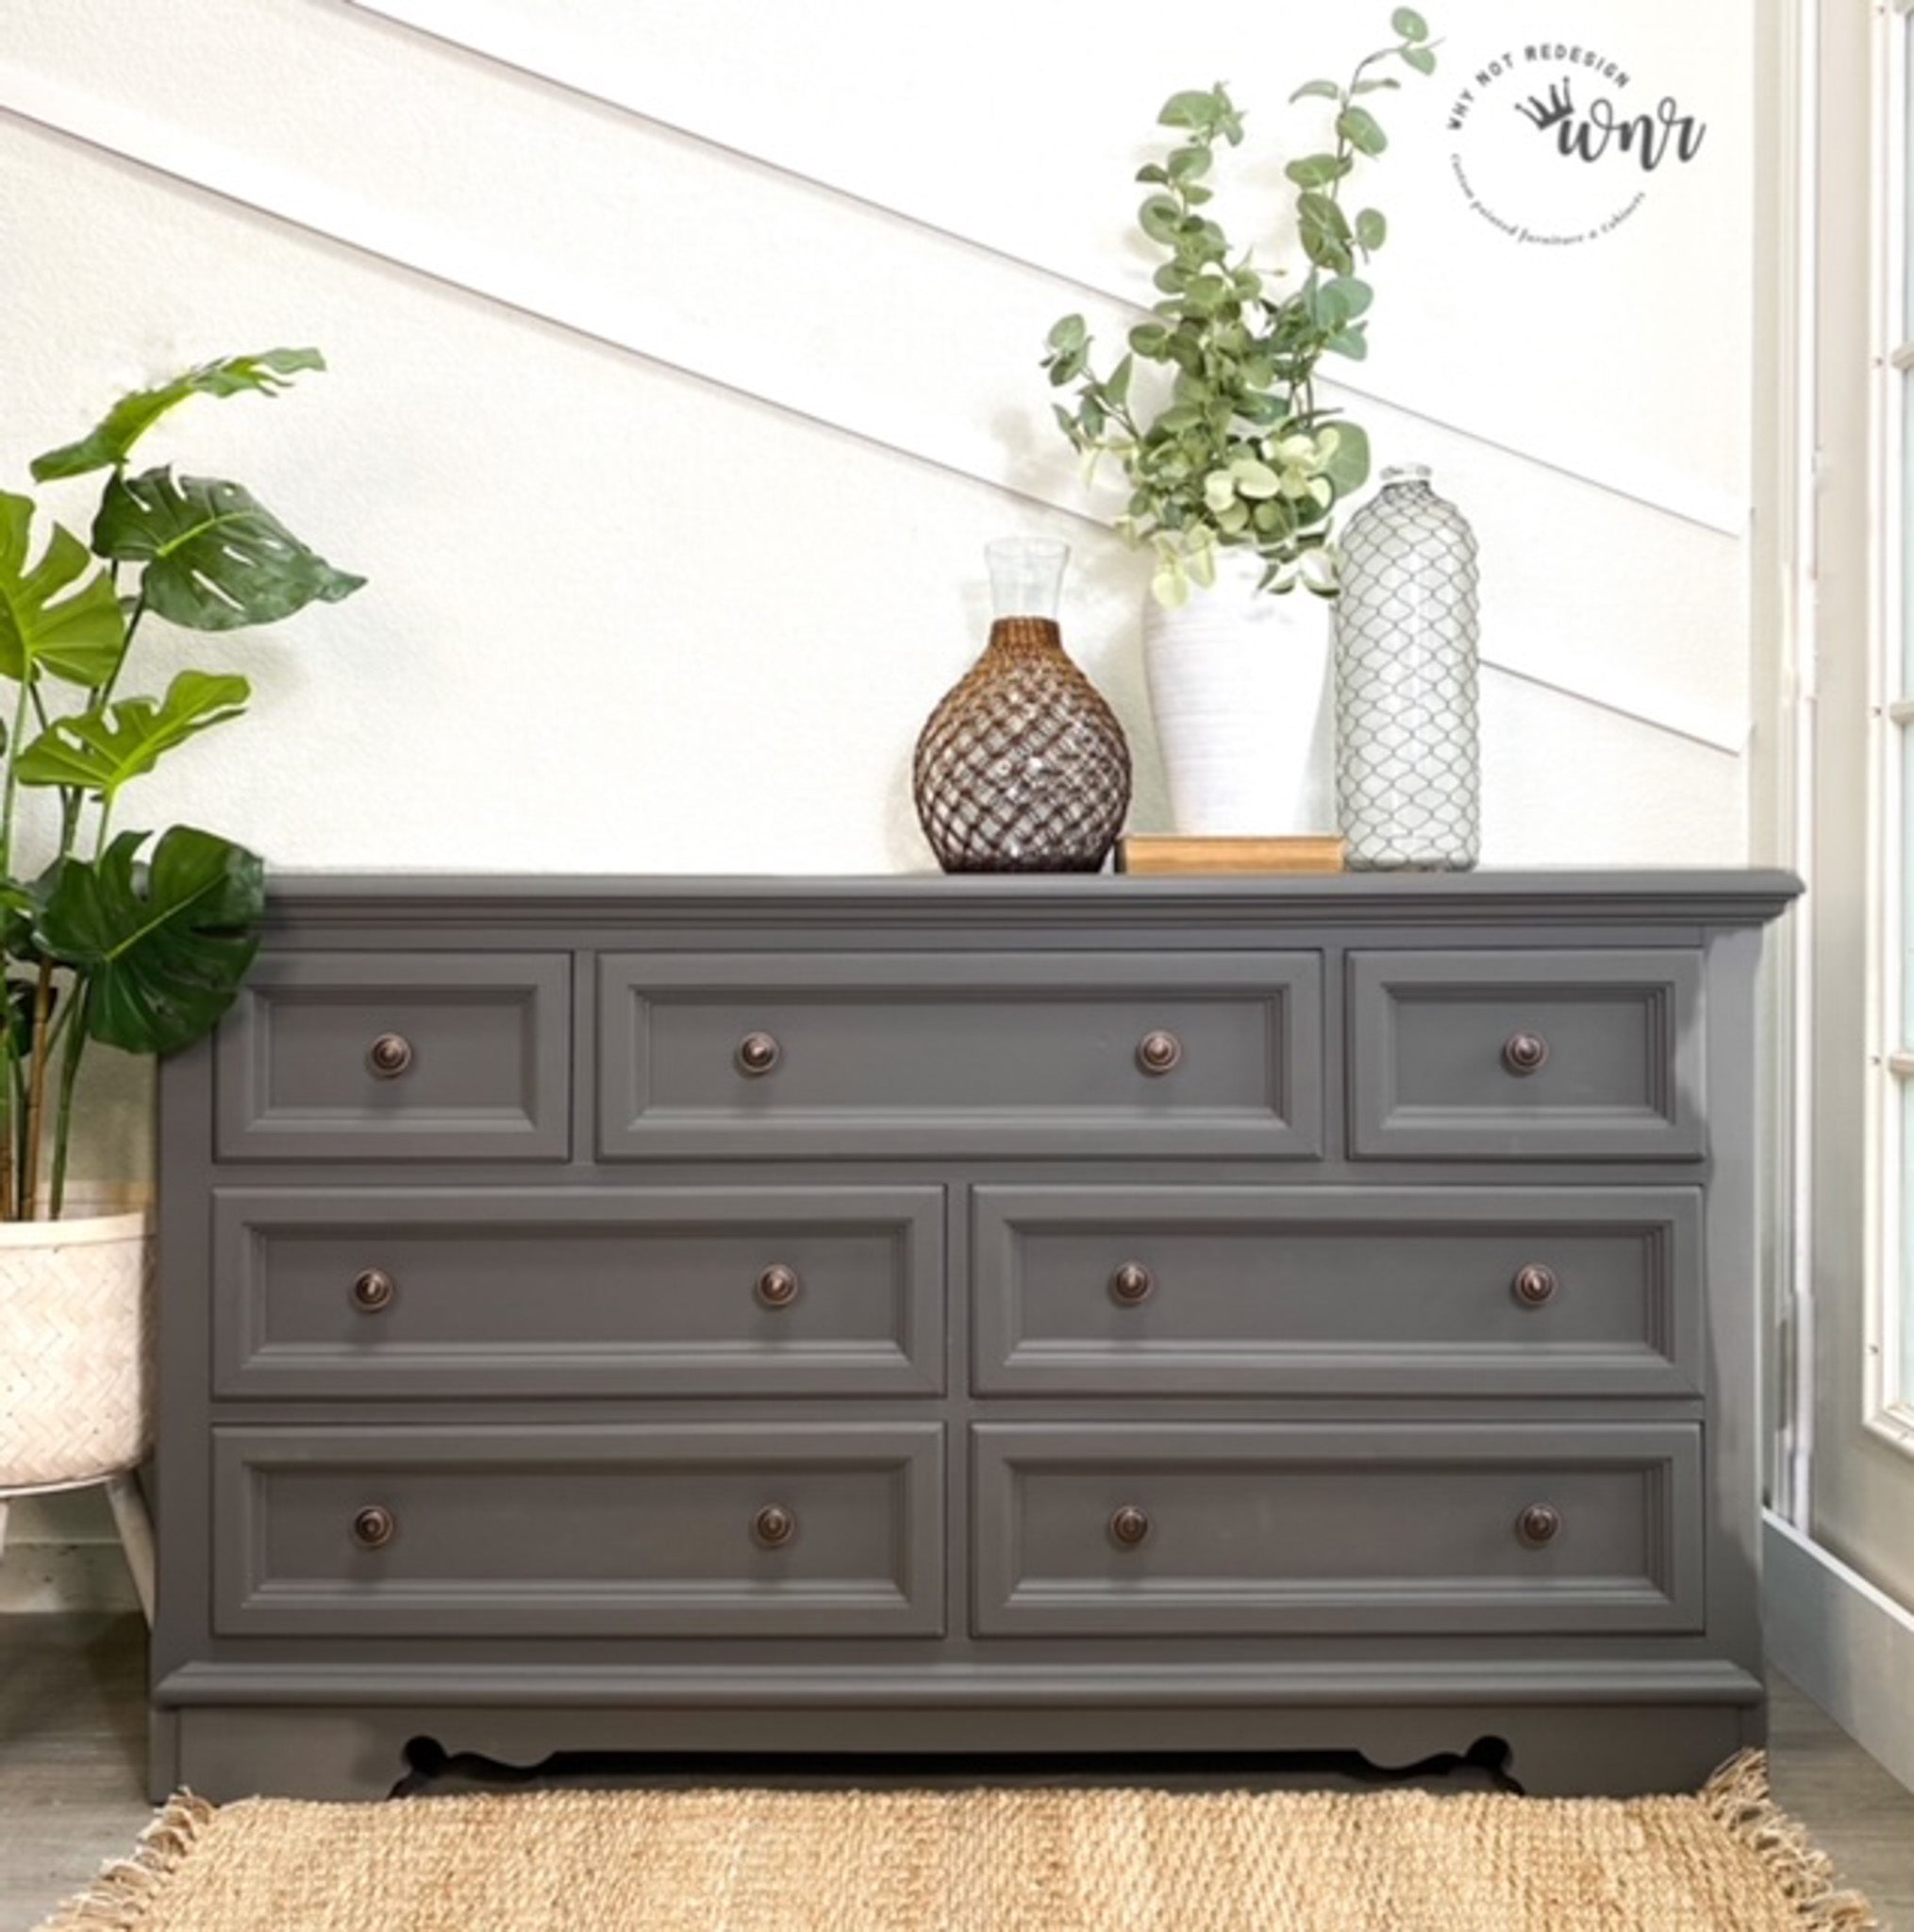 A vintage 7-drawer dresser refurbished by Why Not Redesign is painted in Dixie Belle's Hurricane Gray chalk mineral paint.